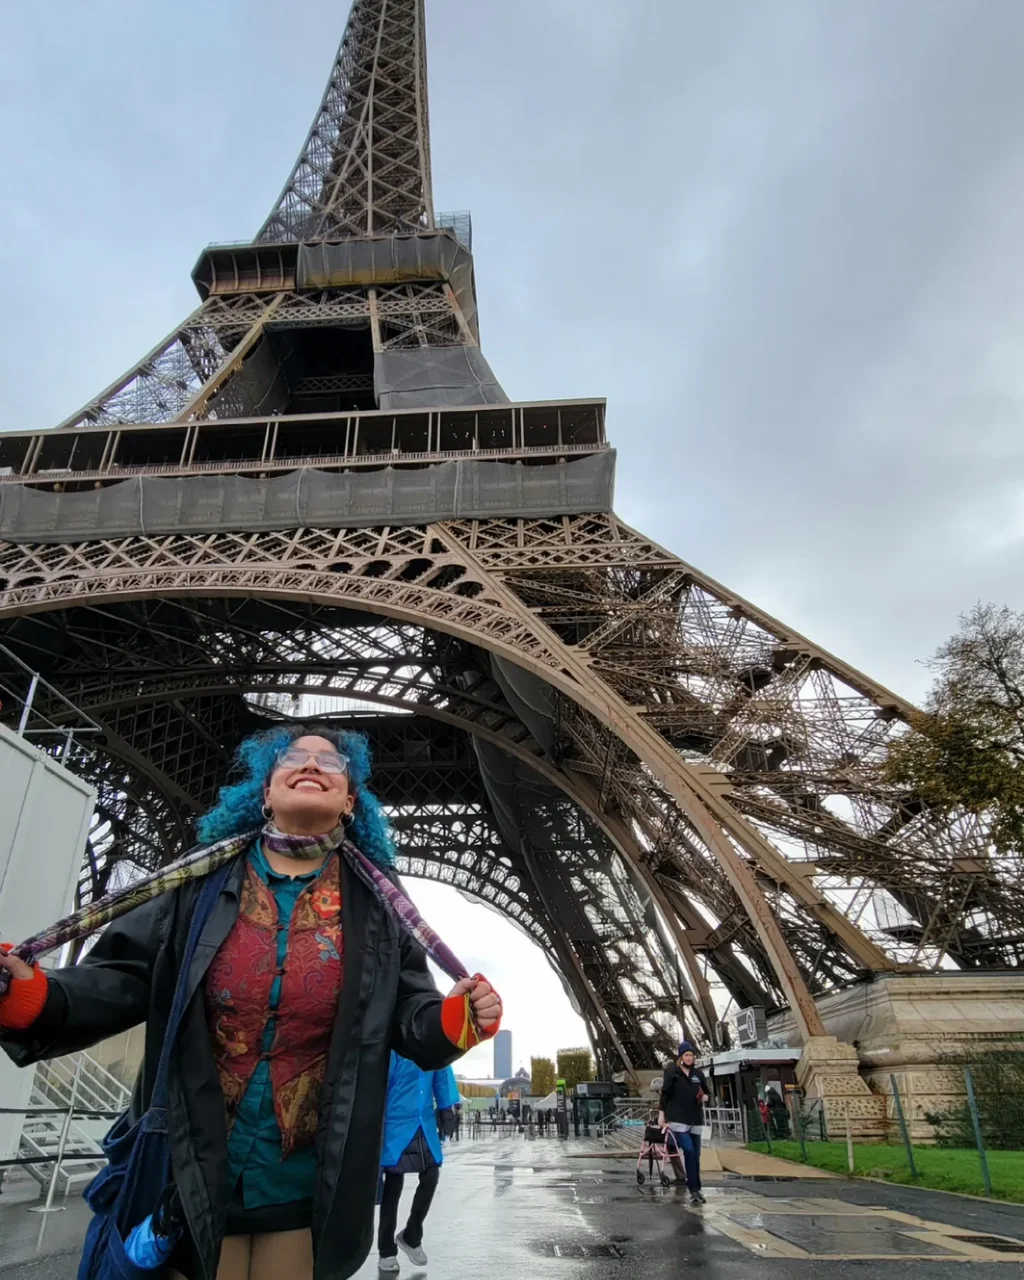 Person (me) in front of eiffel tower